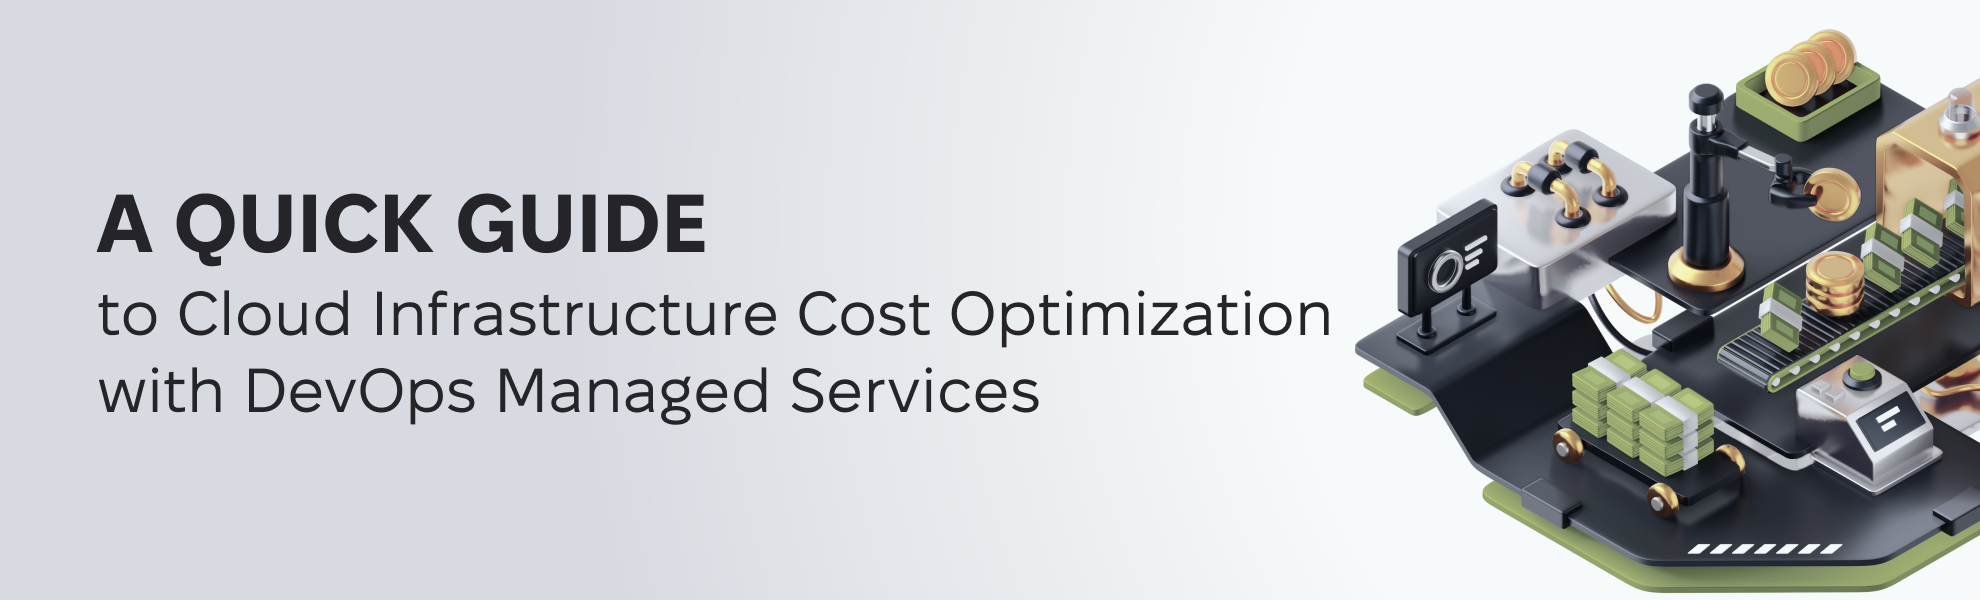 A Quick Guide to Cloud Infrastructure Cost Optimization with DevOps Managed Services